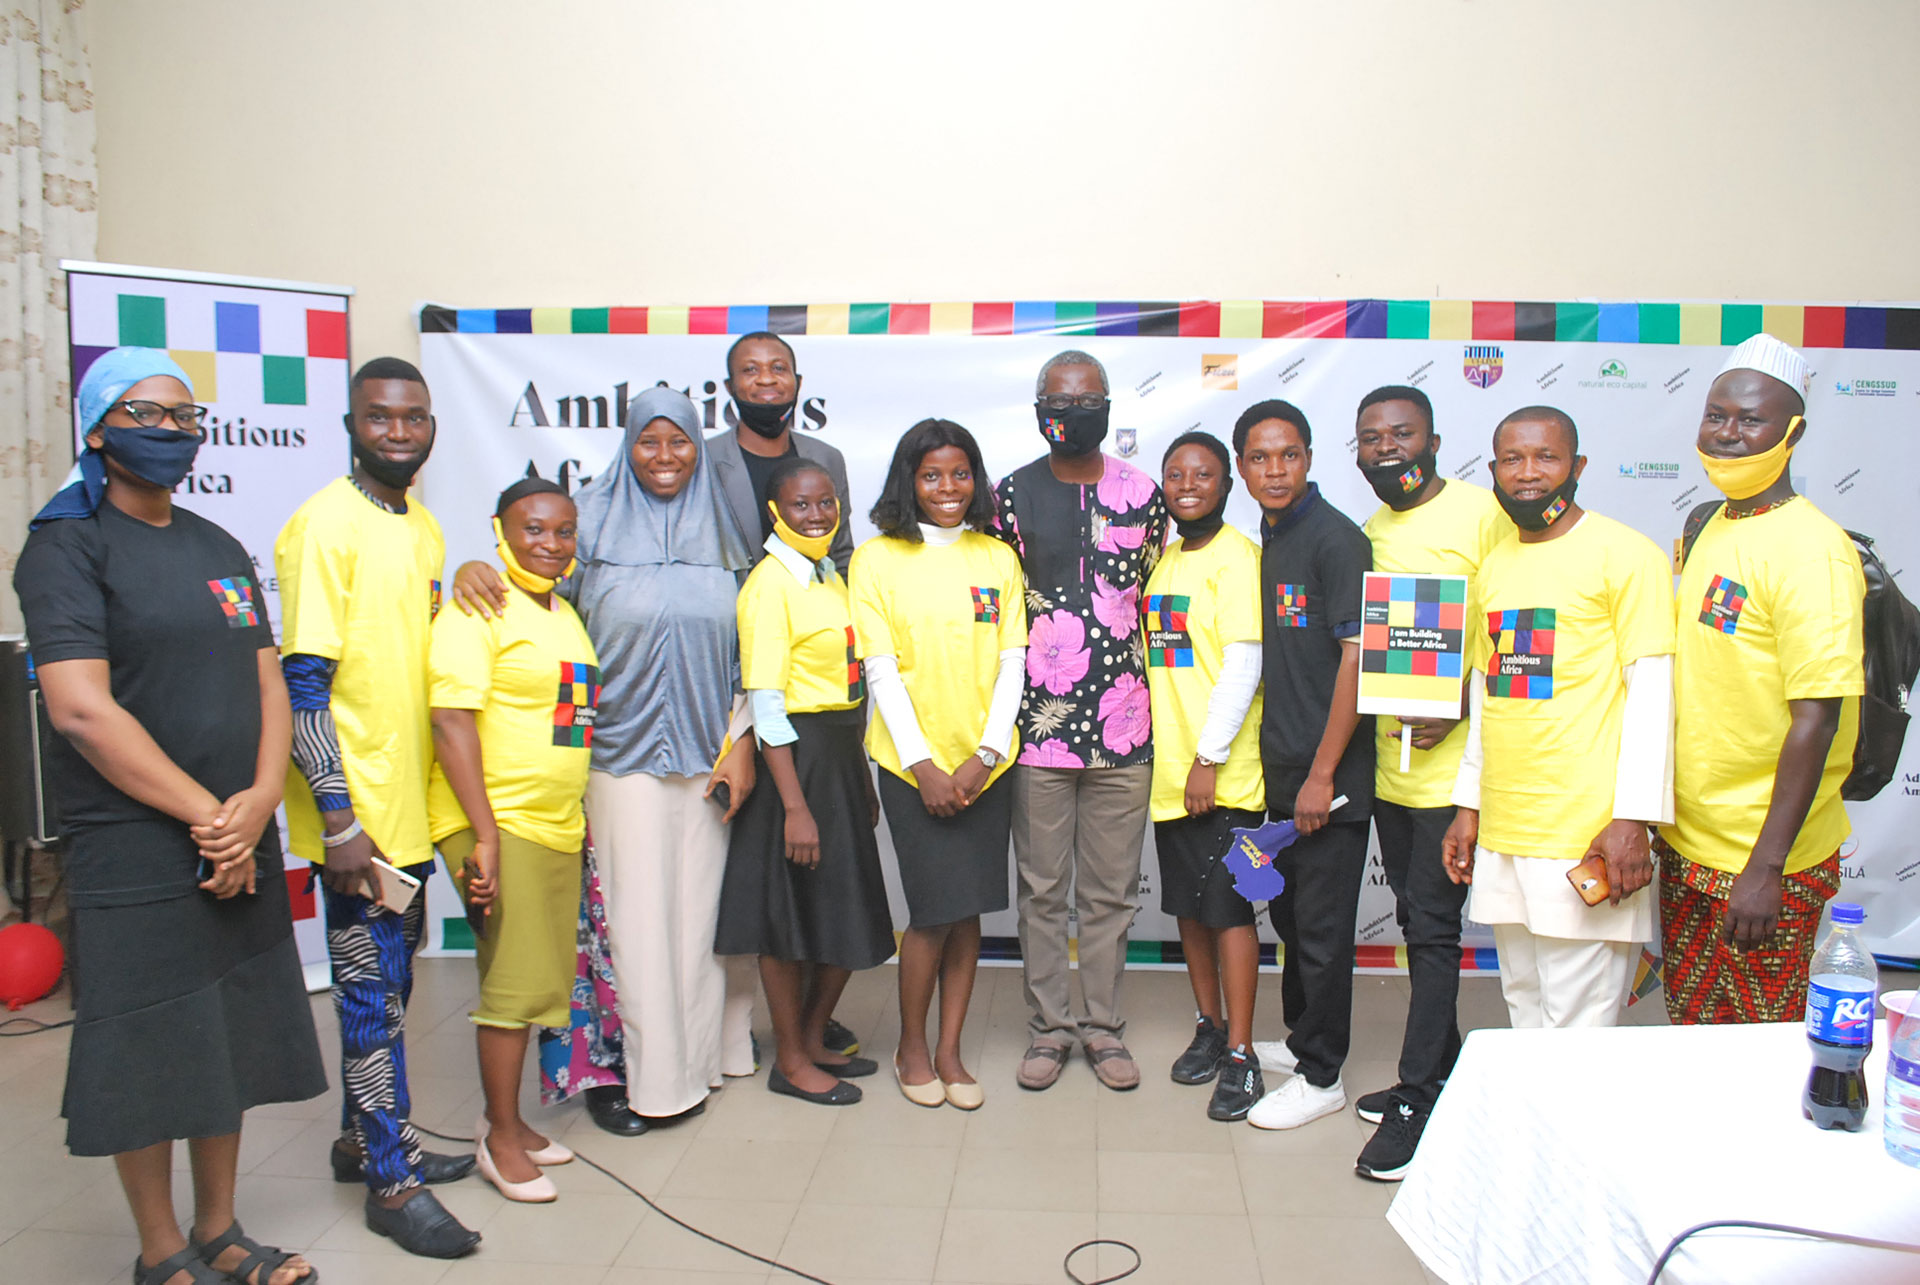 Wärtsilä and Ambitious.Africa kicked-off their partnership with a sustainability seminar series for Nigerian Master’s students